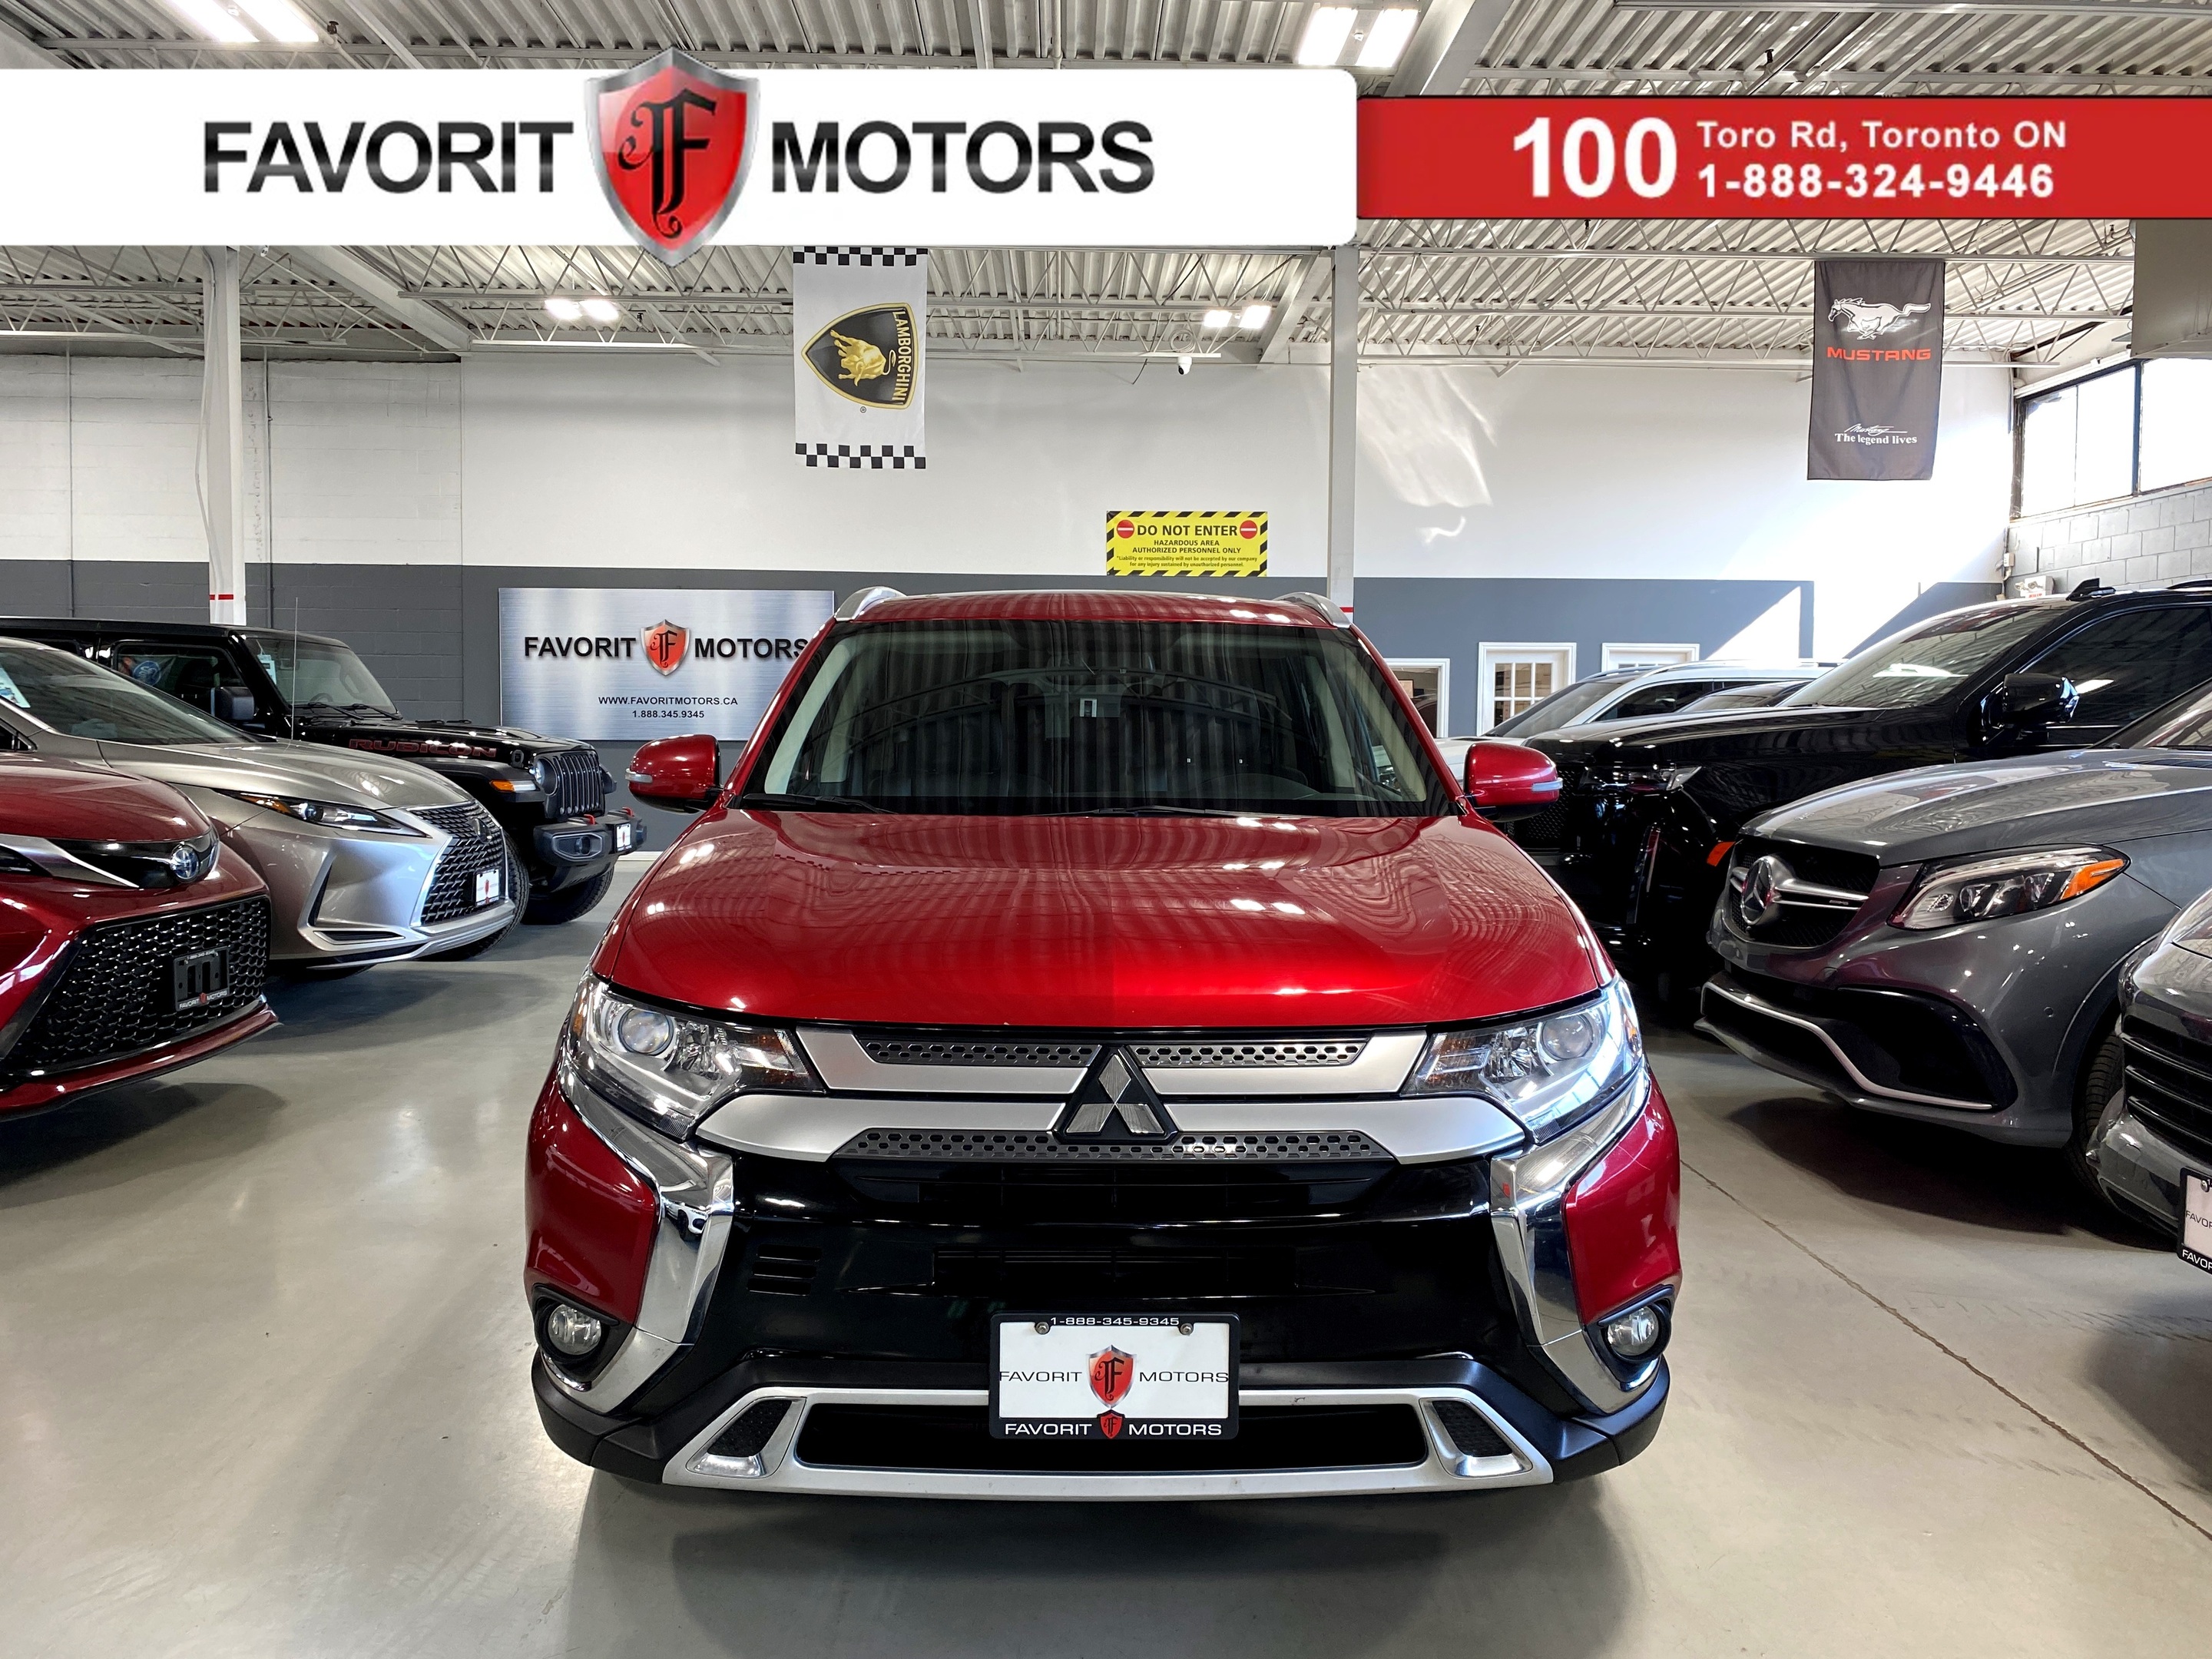 2020 Mitsubishi Outlander ES S-AWC |LEATHER|SUNROOF|7 PASS.|BACKUP CAM|+